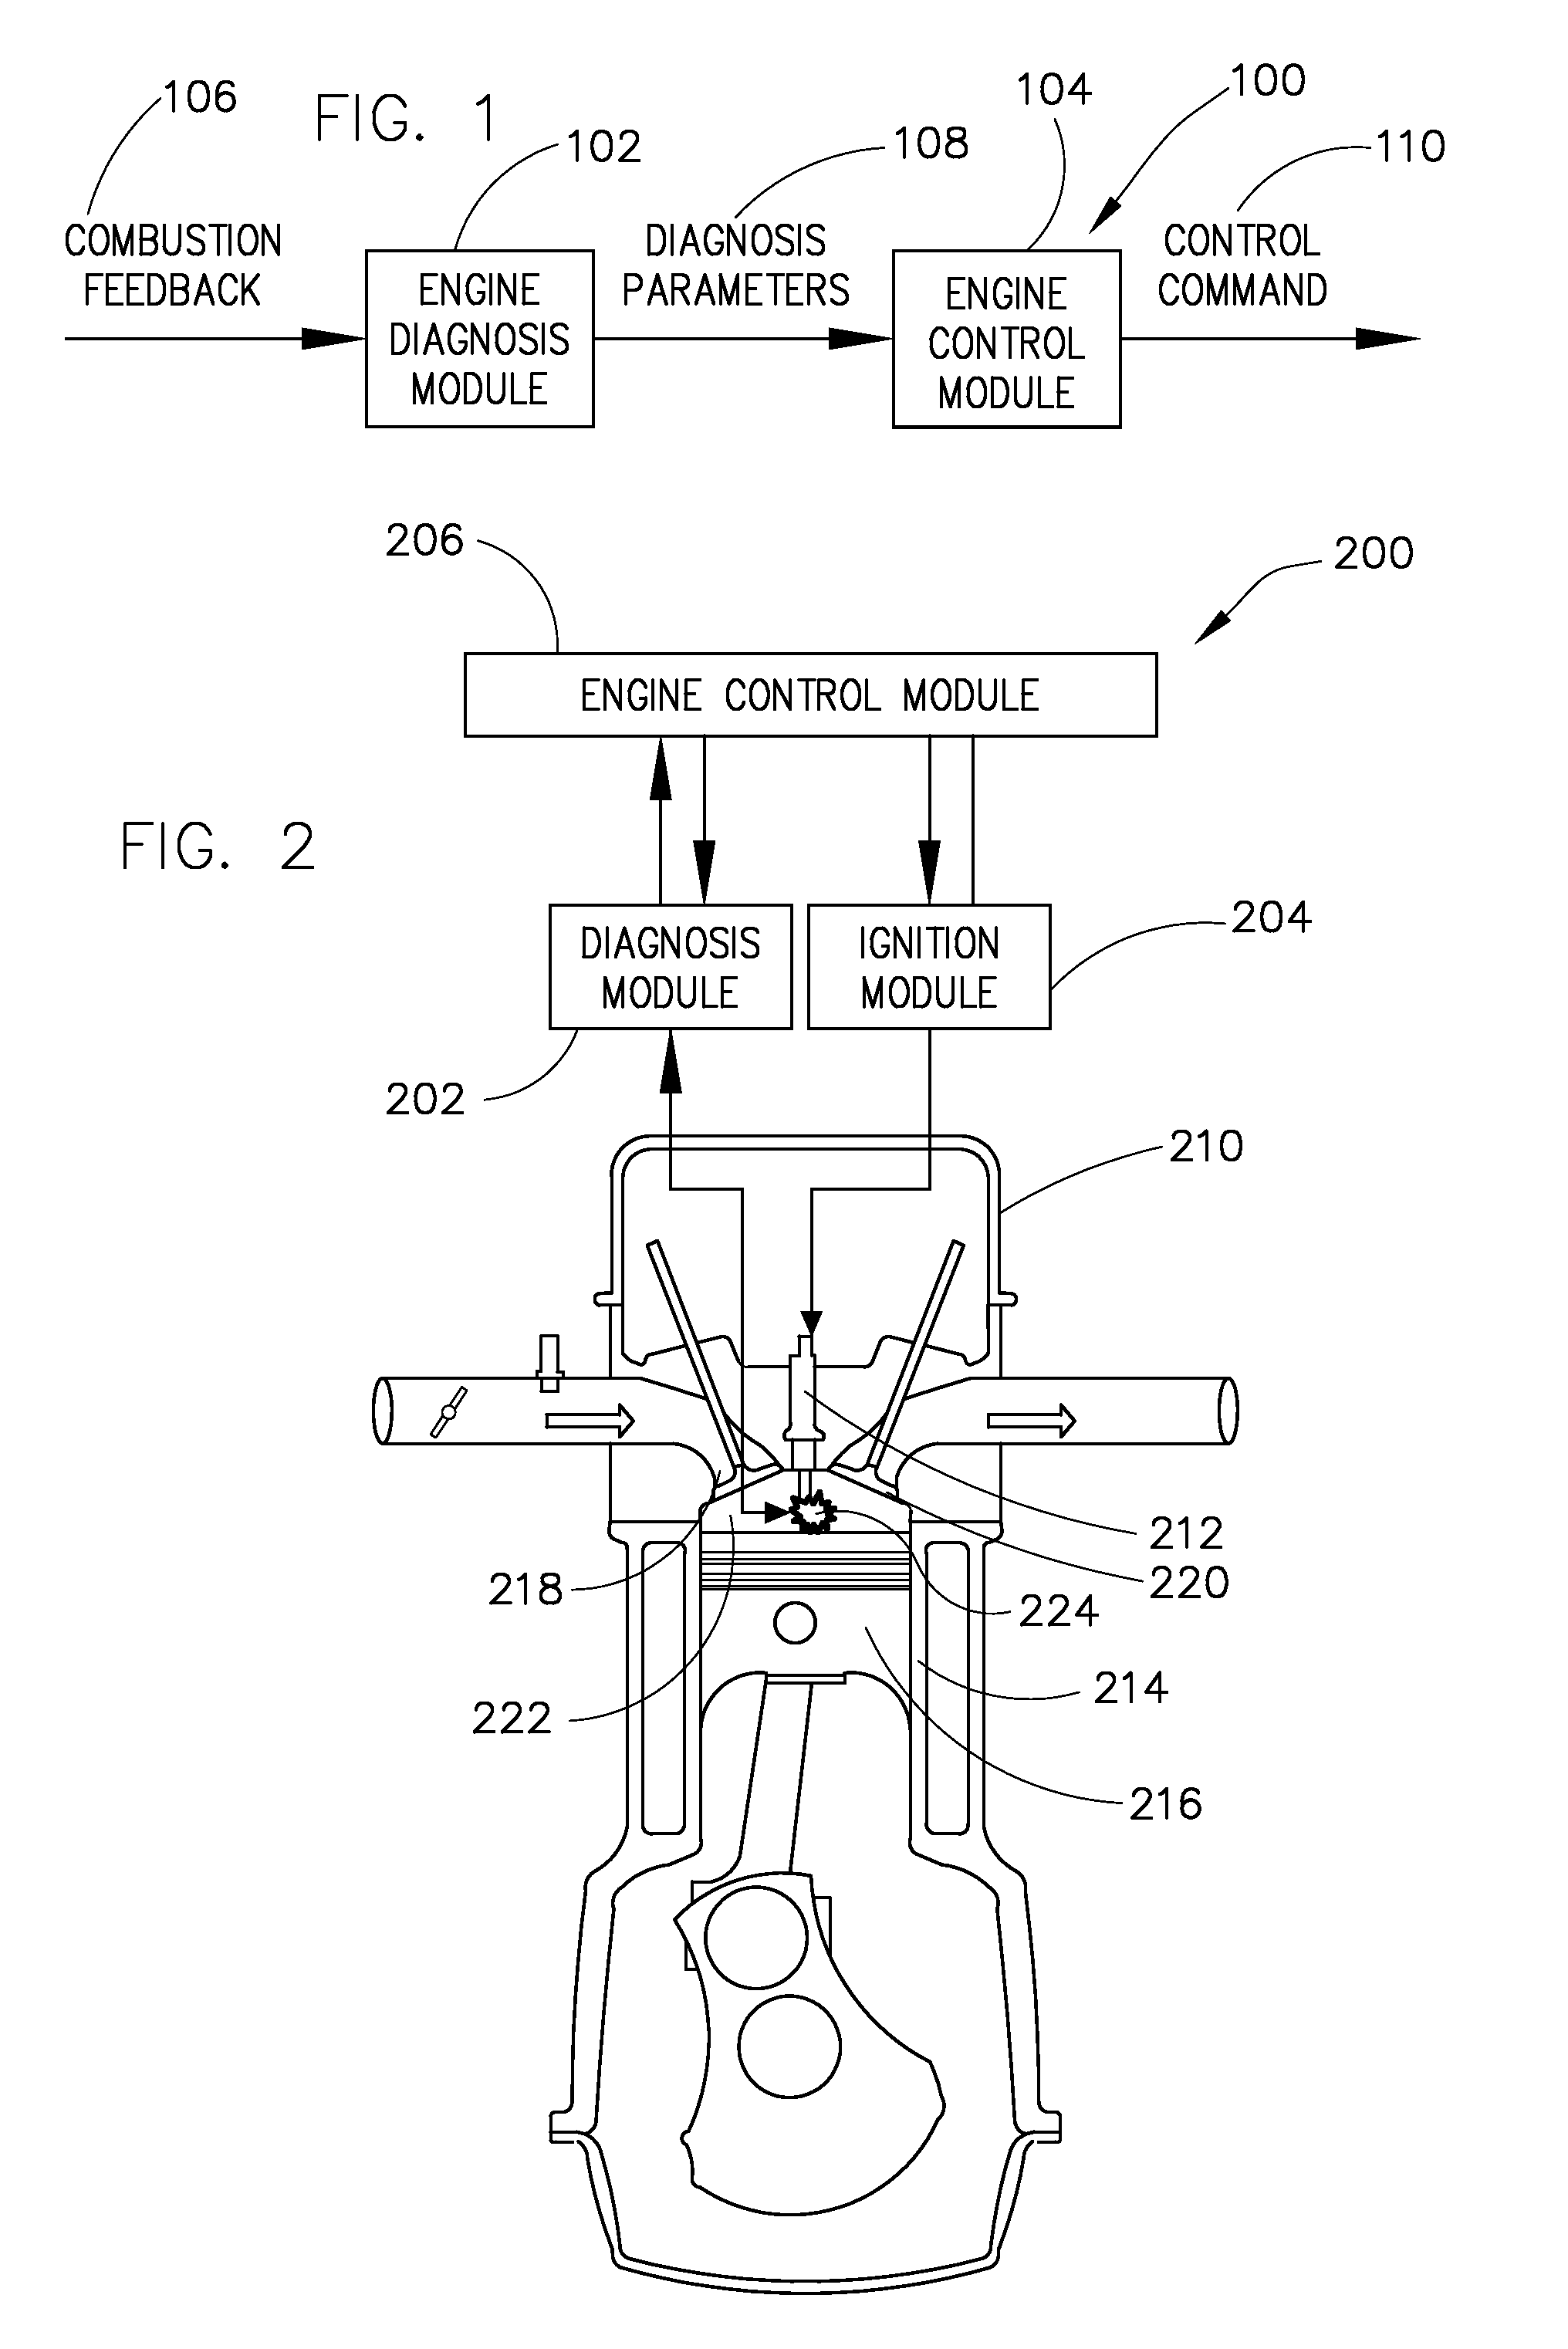 Method and system for closed loop combustion control of a lean-burn reciprocating engine using ionization detection